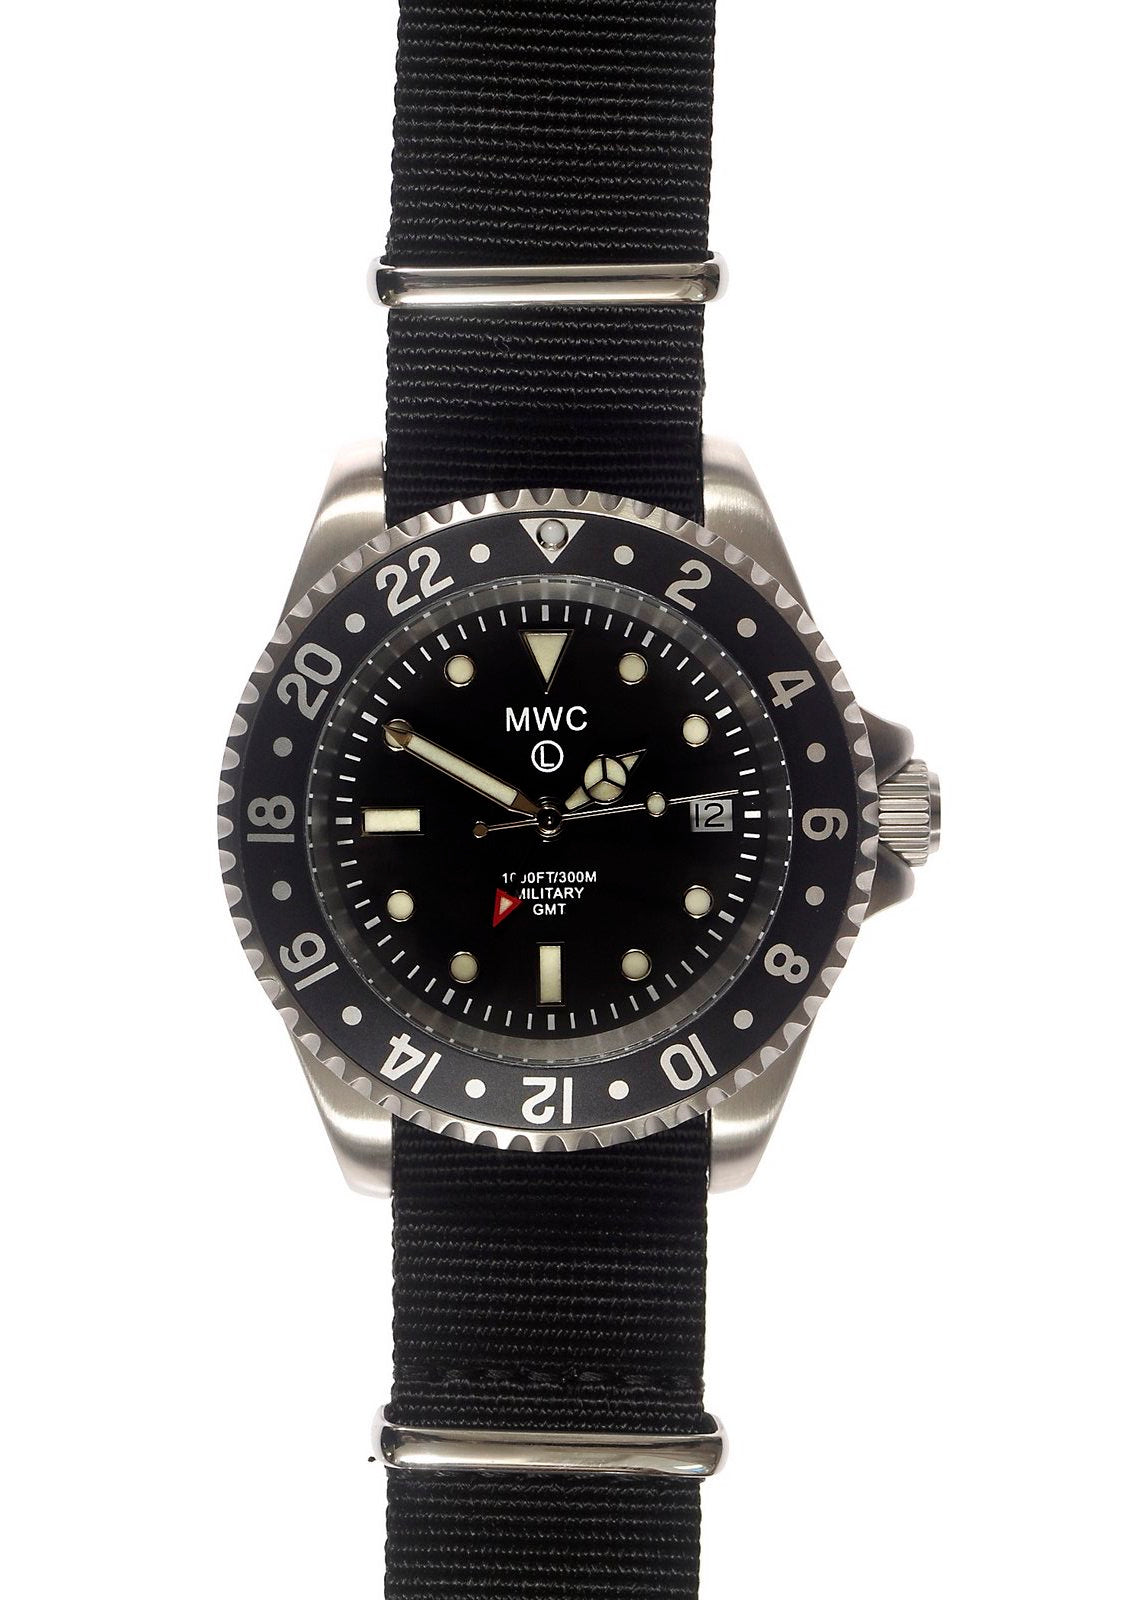 GMT Watches | Military Industries | Timepieces